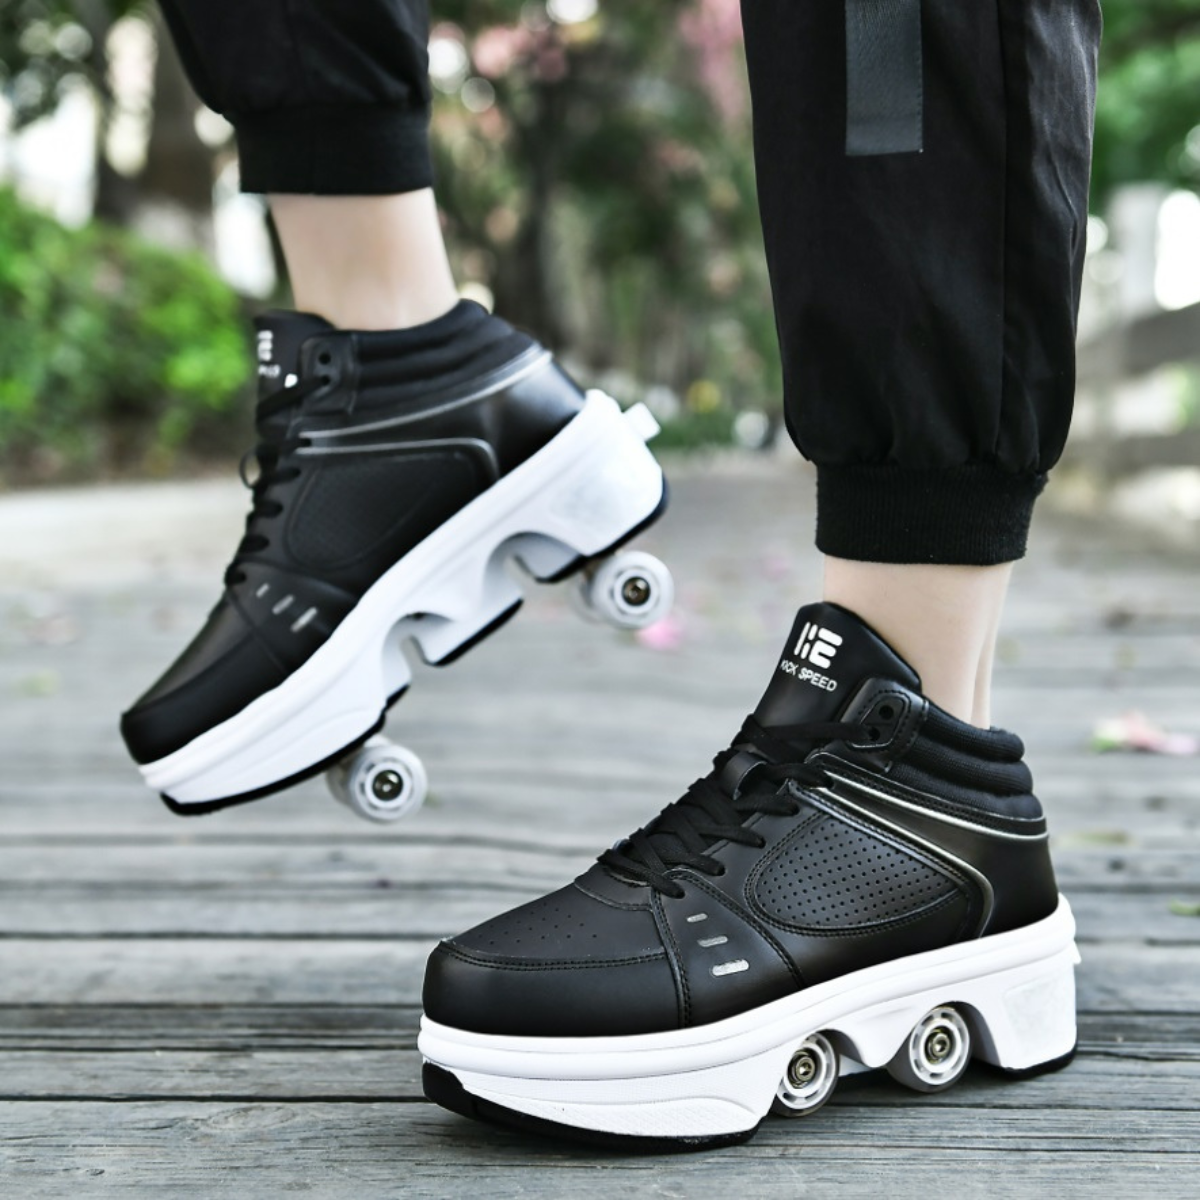 roller skate shoes for adults